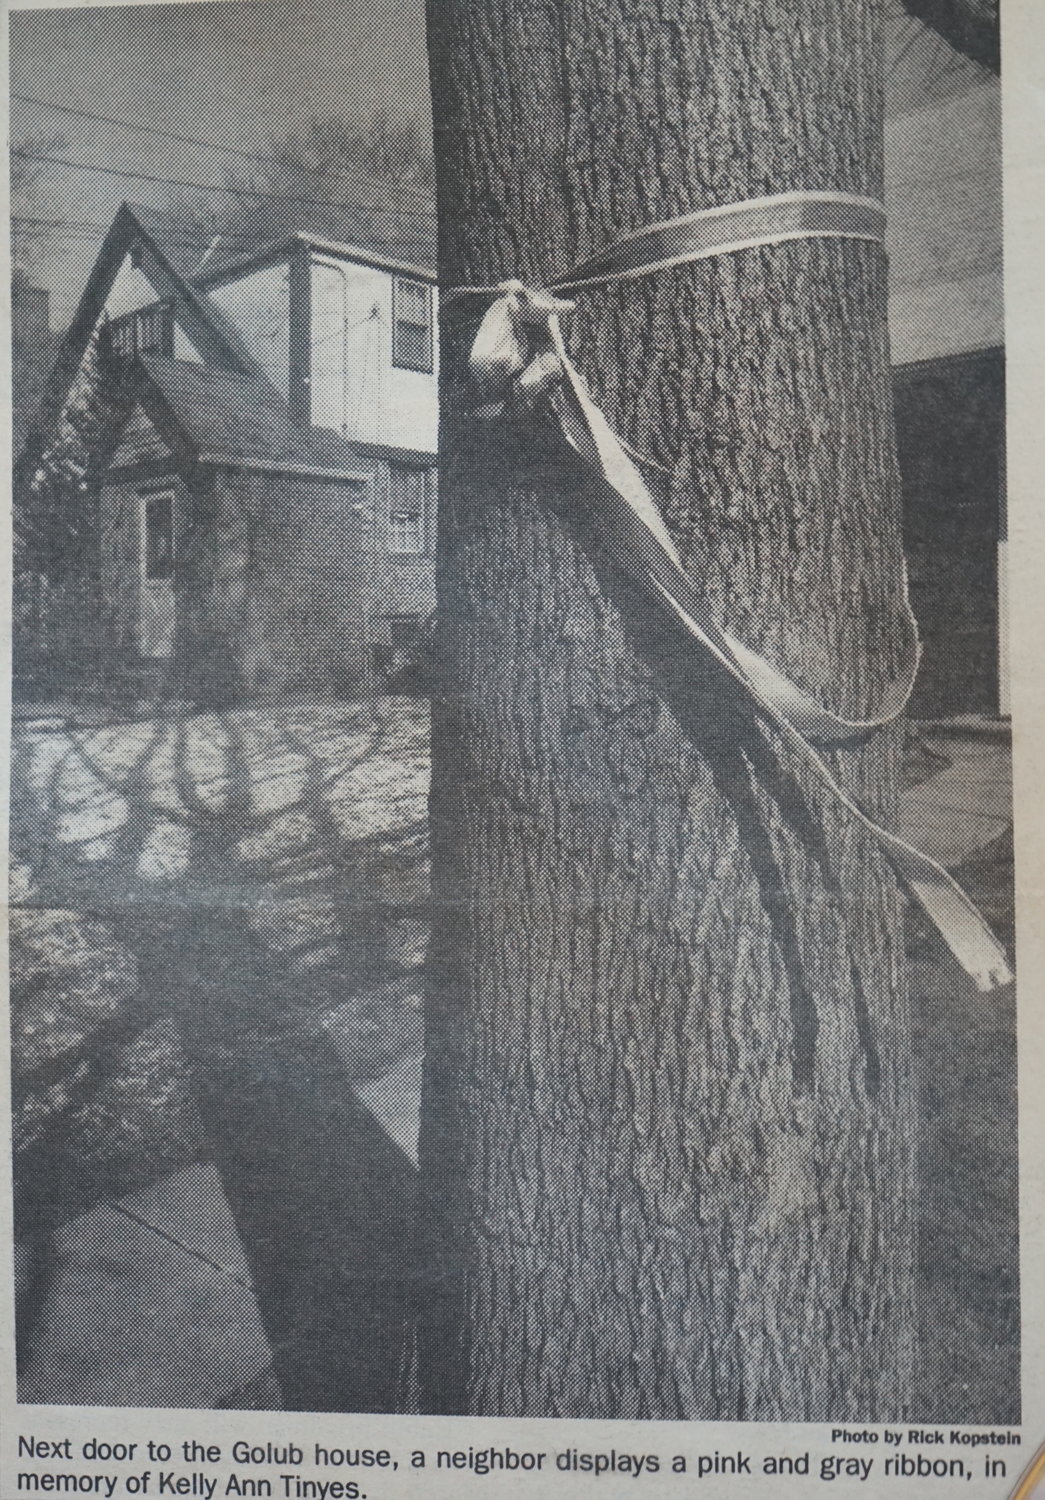 A photo from a March 1990 issue of the Nassau Herald. A pink and gray ribbon was tied to a tree neighboring the Golub house, in memory of Kelly Ann Tinyes.